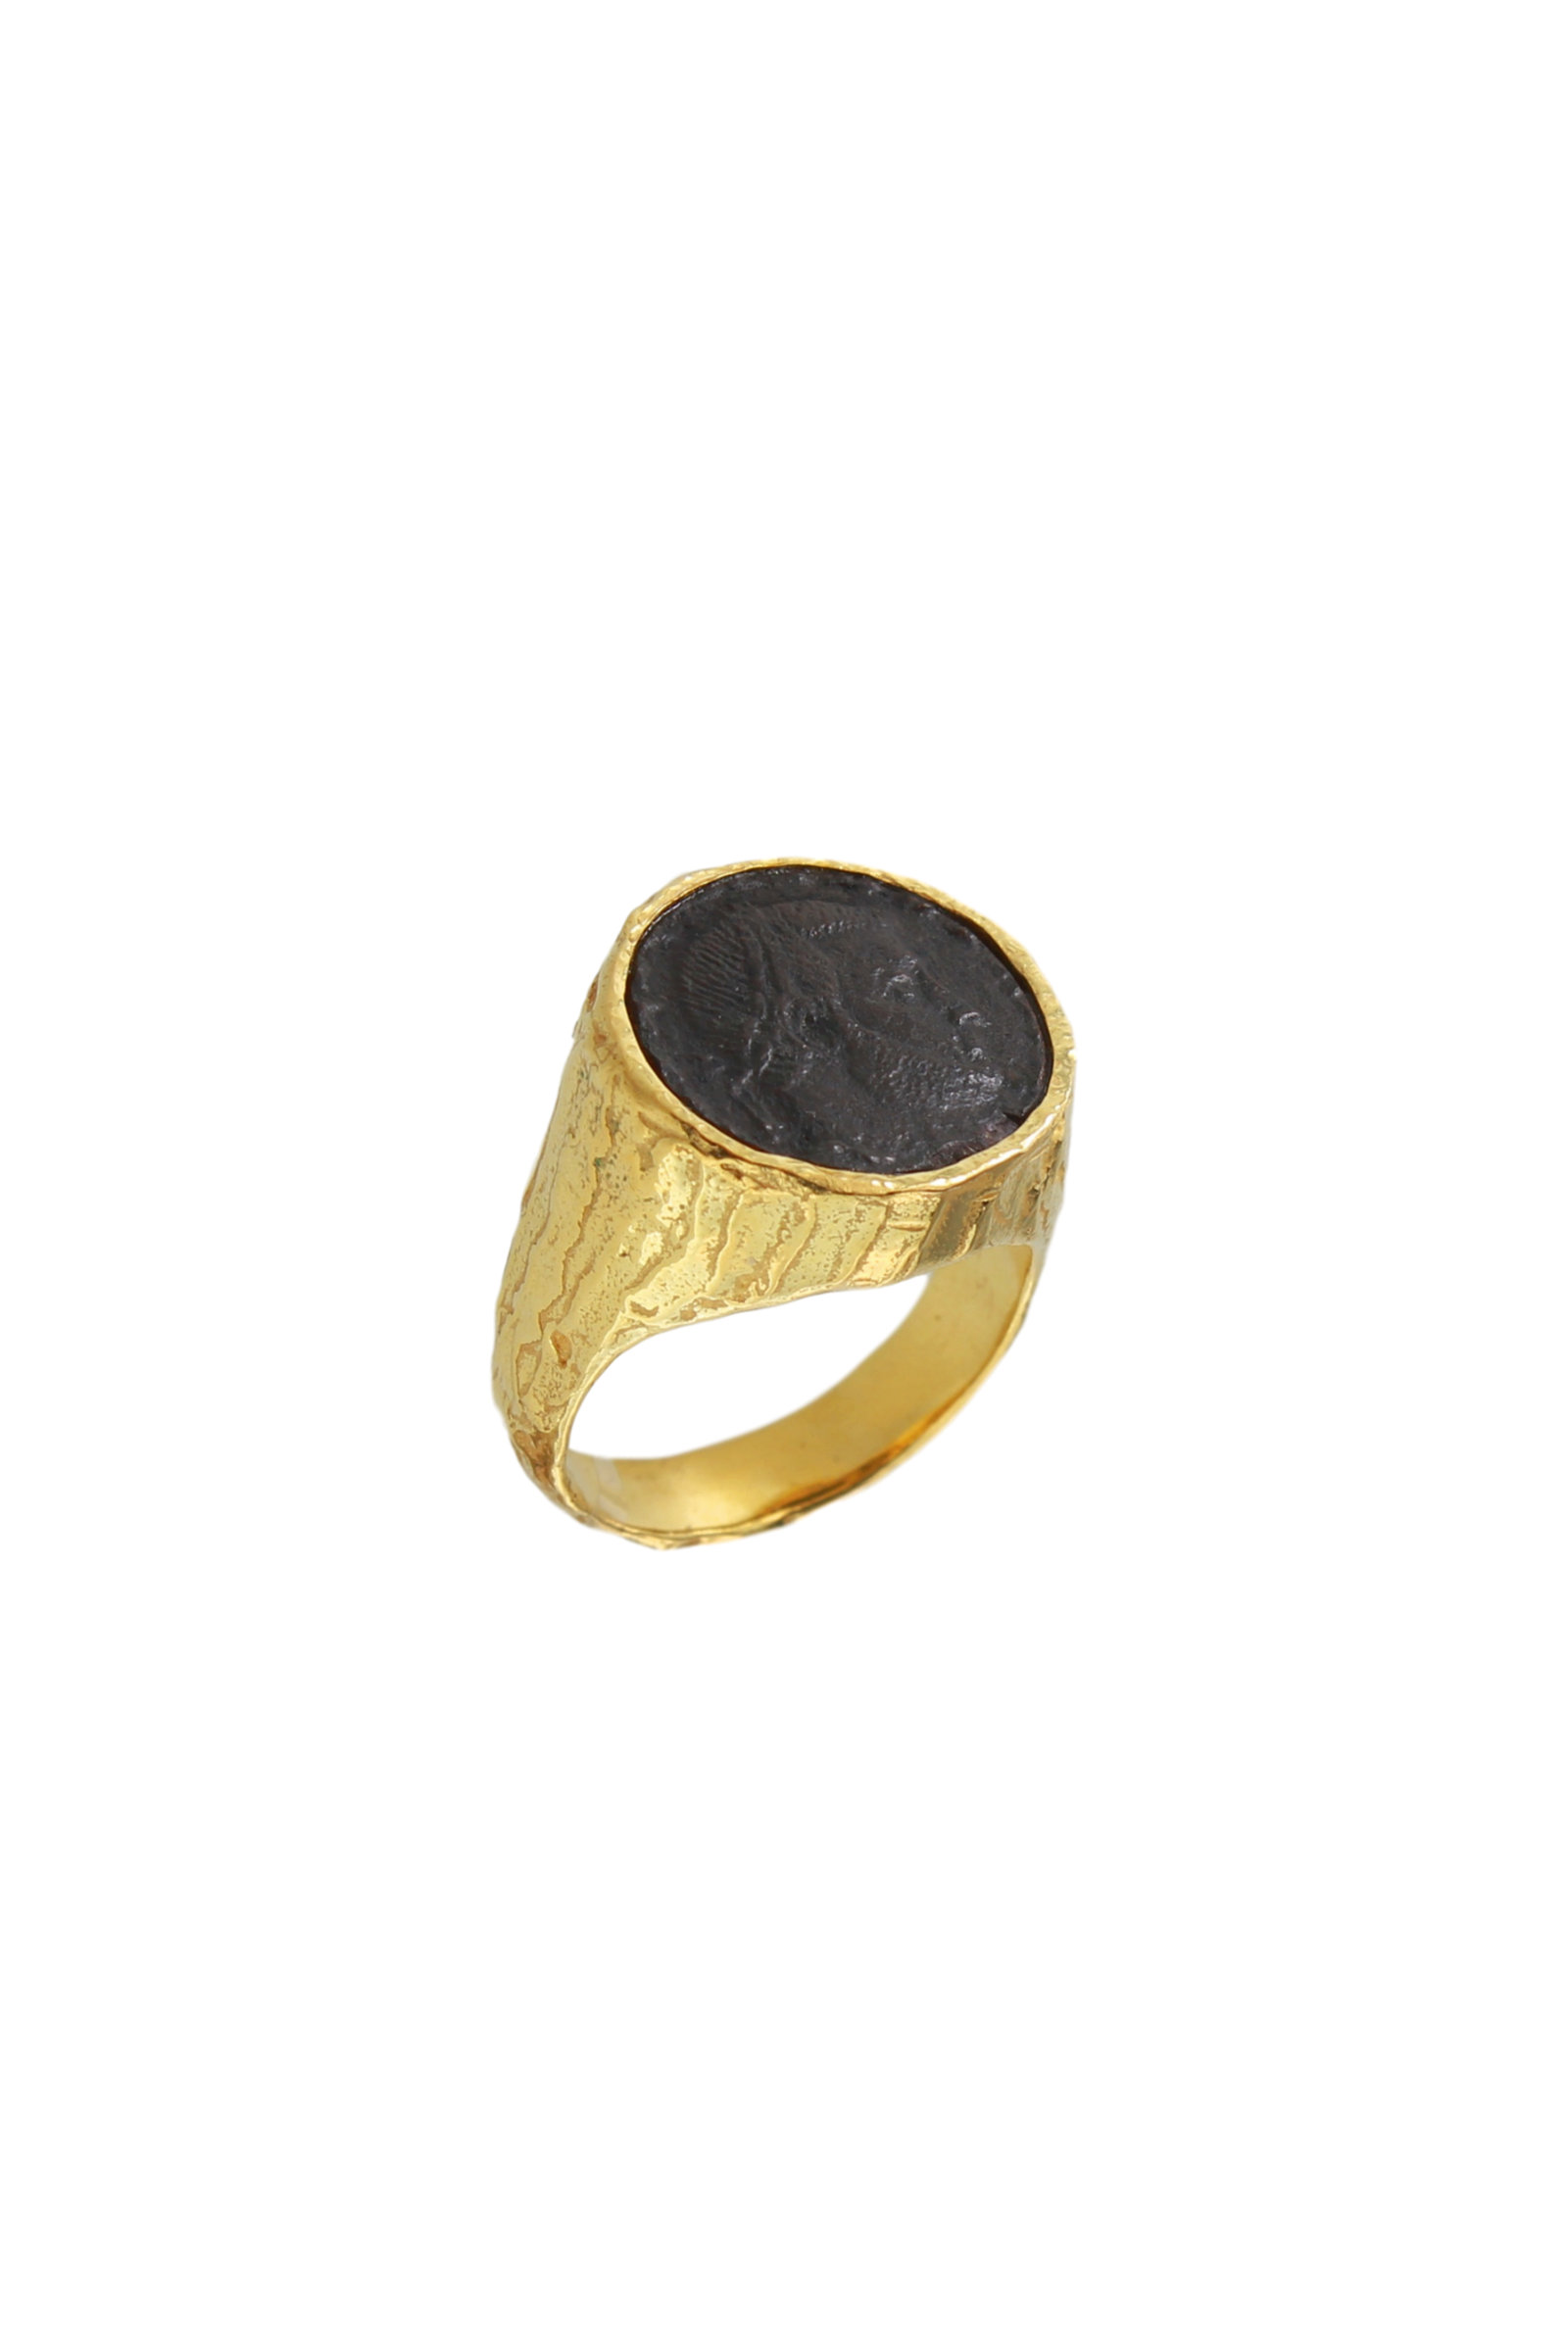 SE651F-18-Kt-Yellow-Gold-Signet-Ring-with-Roman-Coin-1